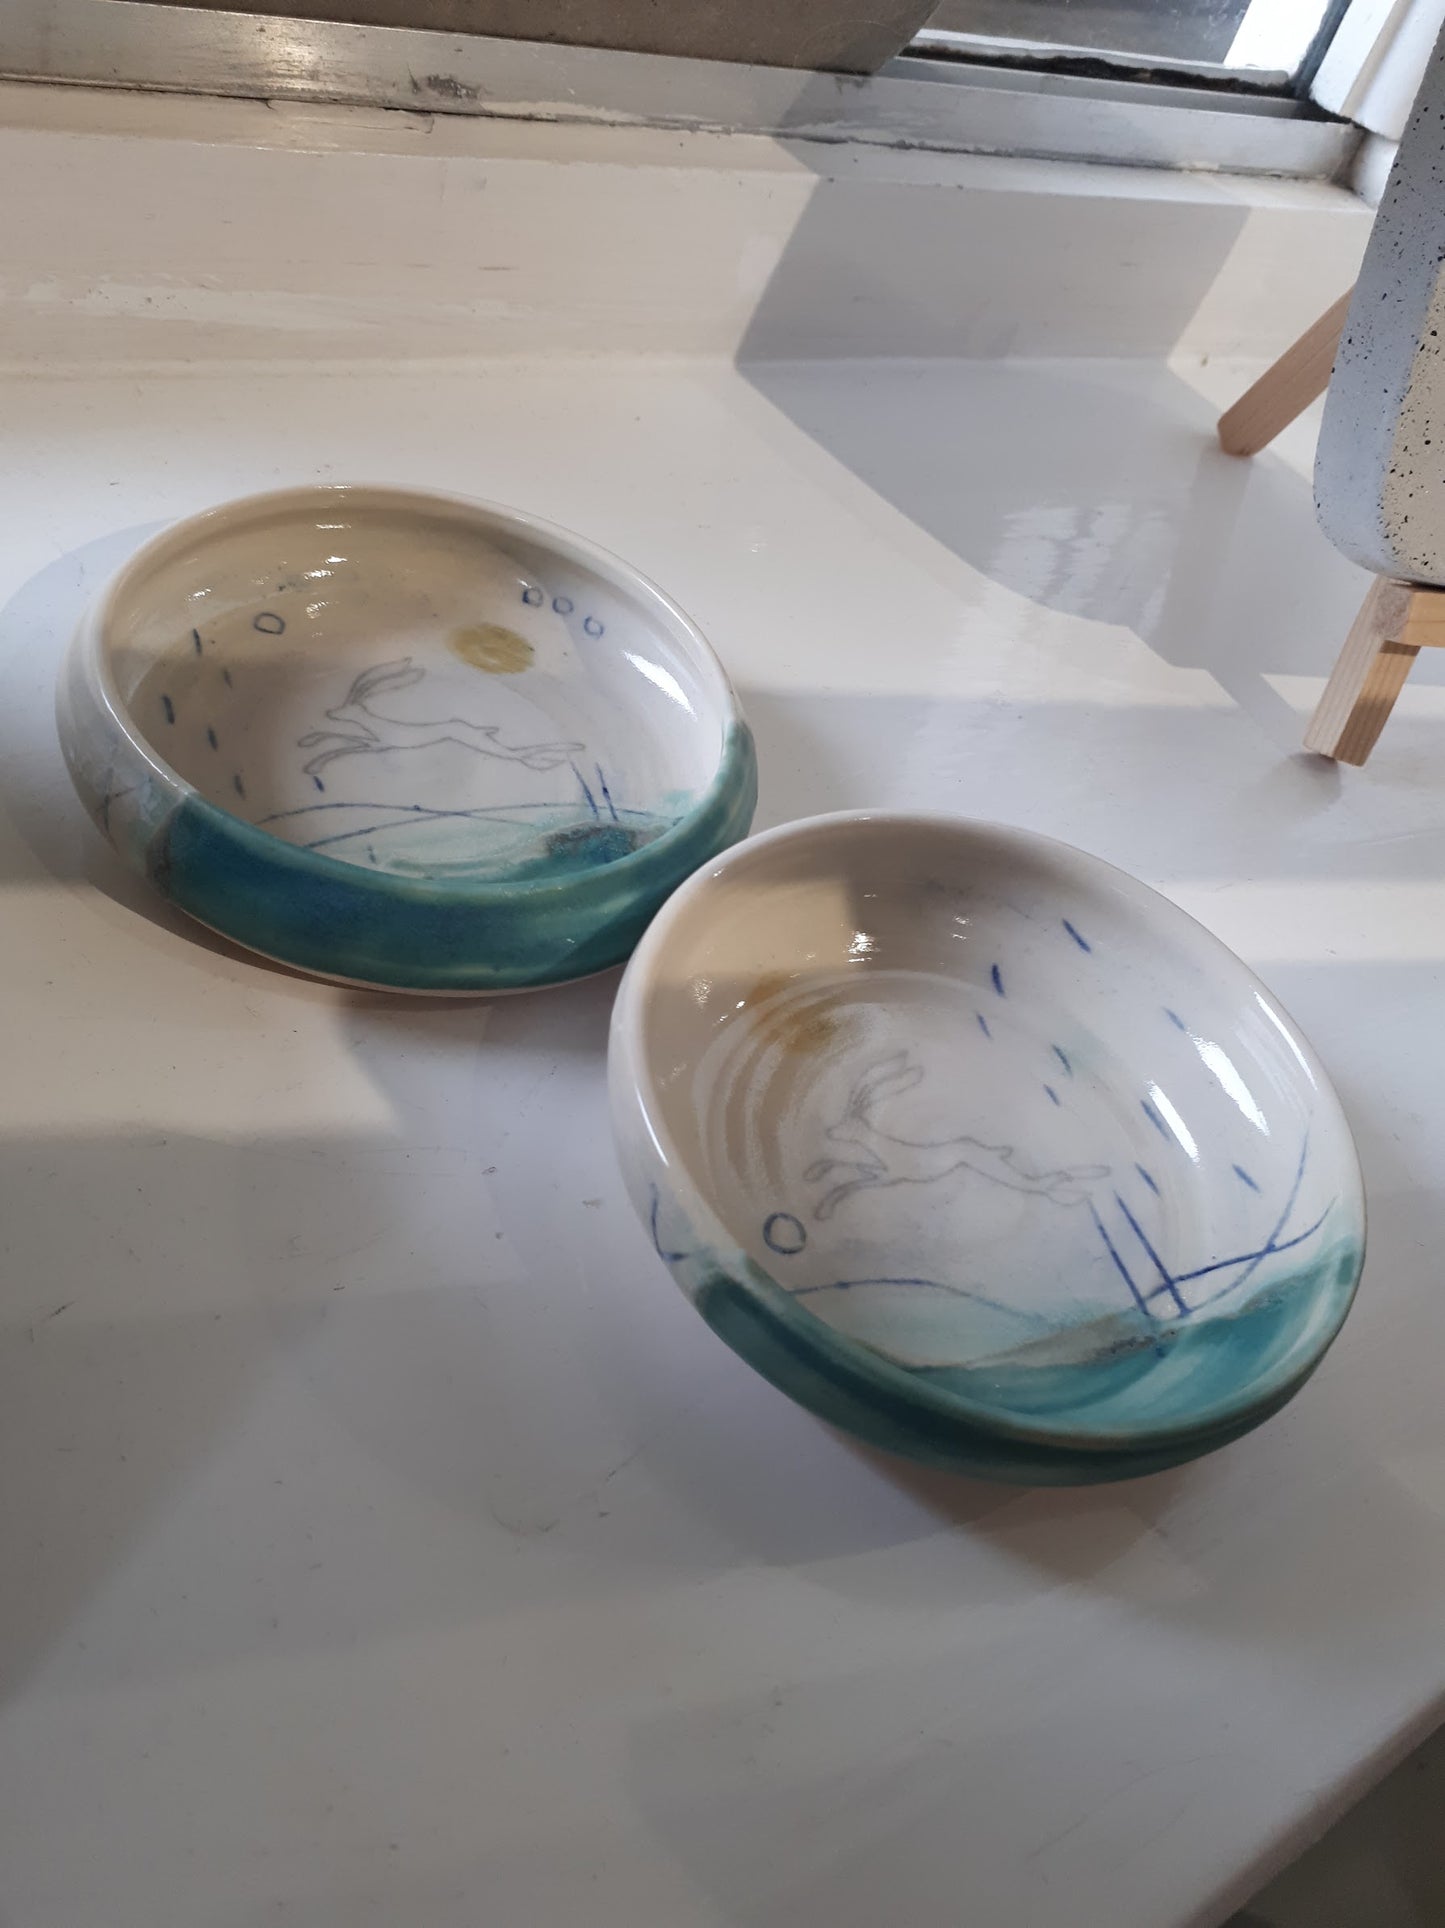 Lorna Gilbert Ceramics - Swooping swift and Leaping Hare ring dishes